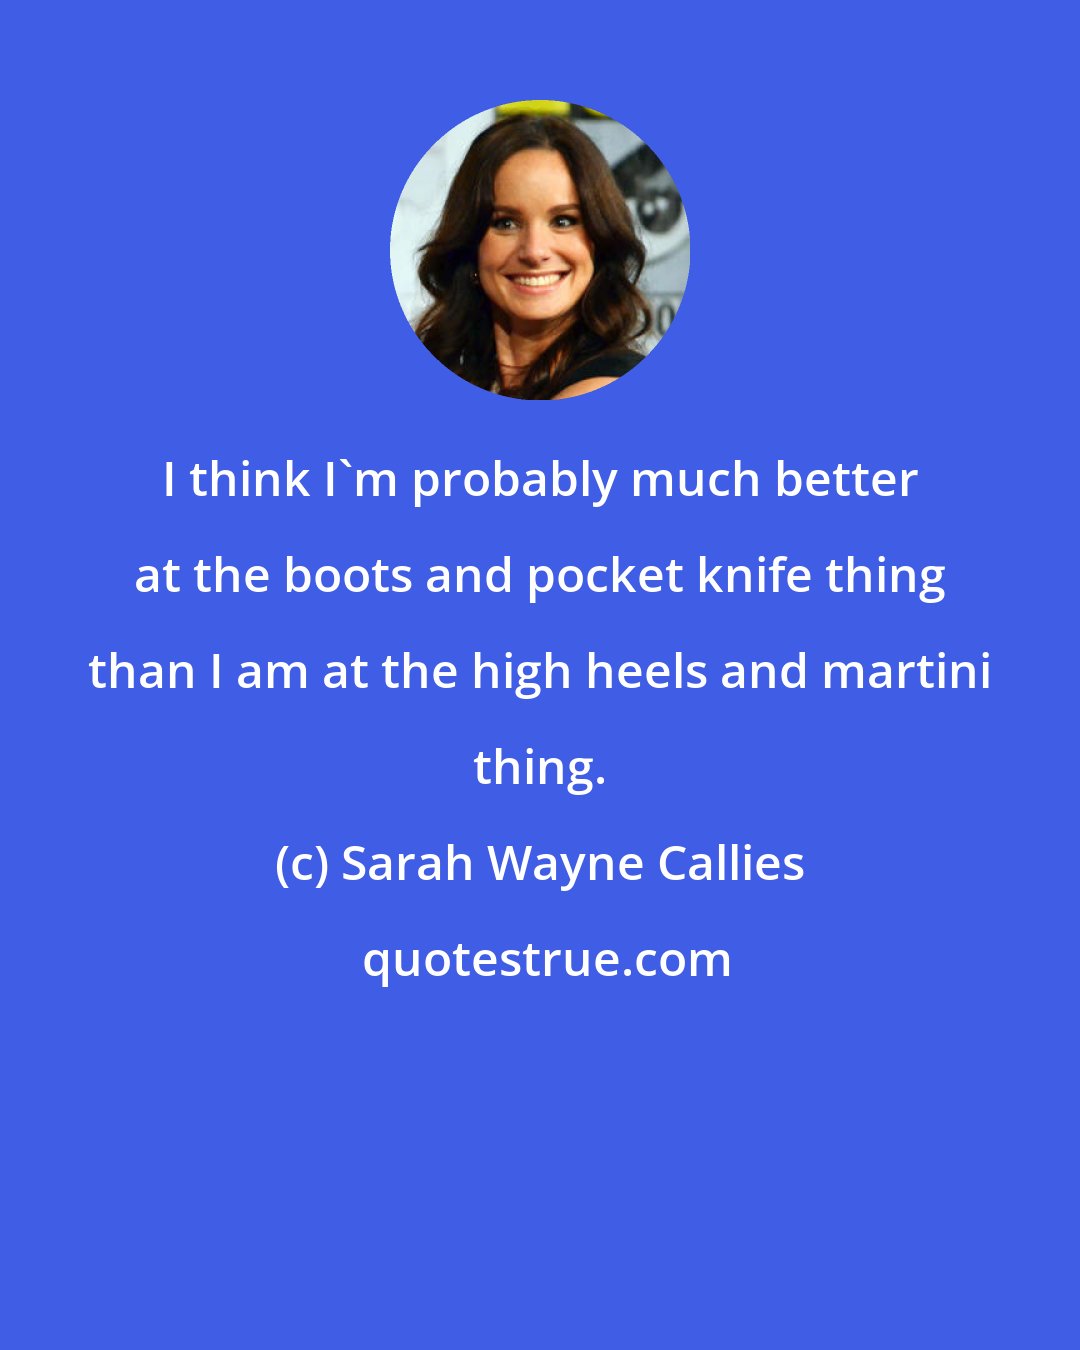 Sarah Wayne Callies: I think I'm probably much better at the boots and pocket knife thing than I am at the high heels and martini thing.